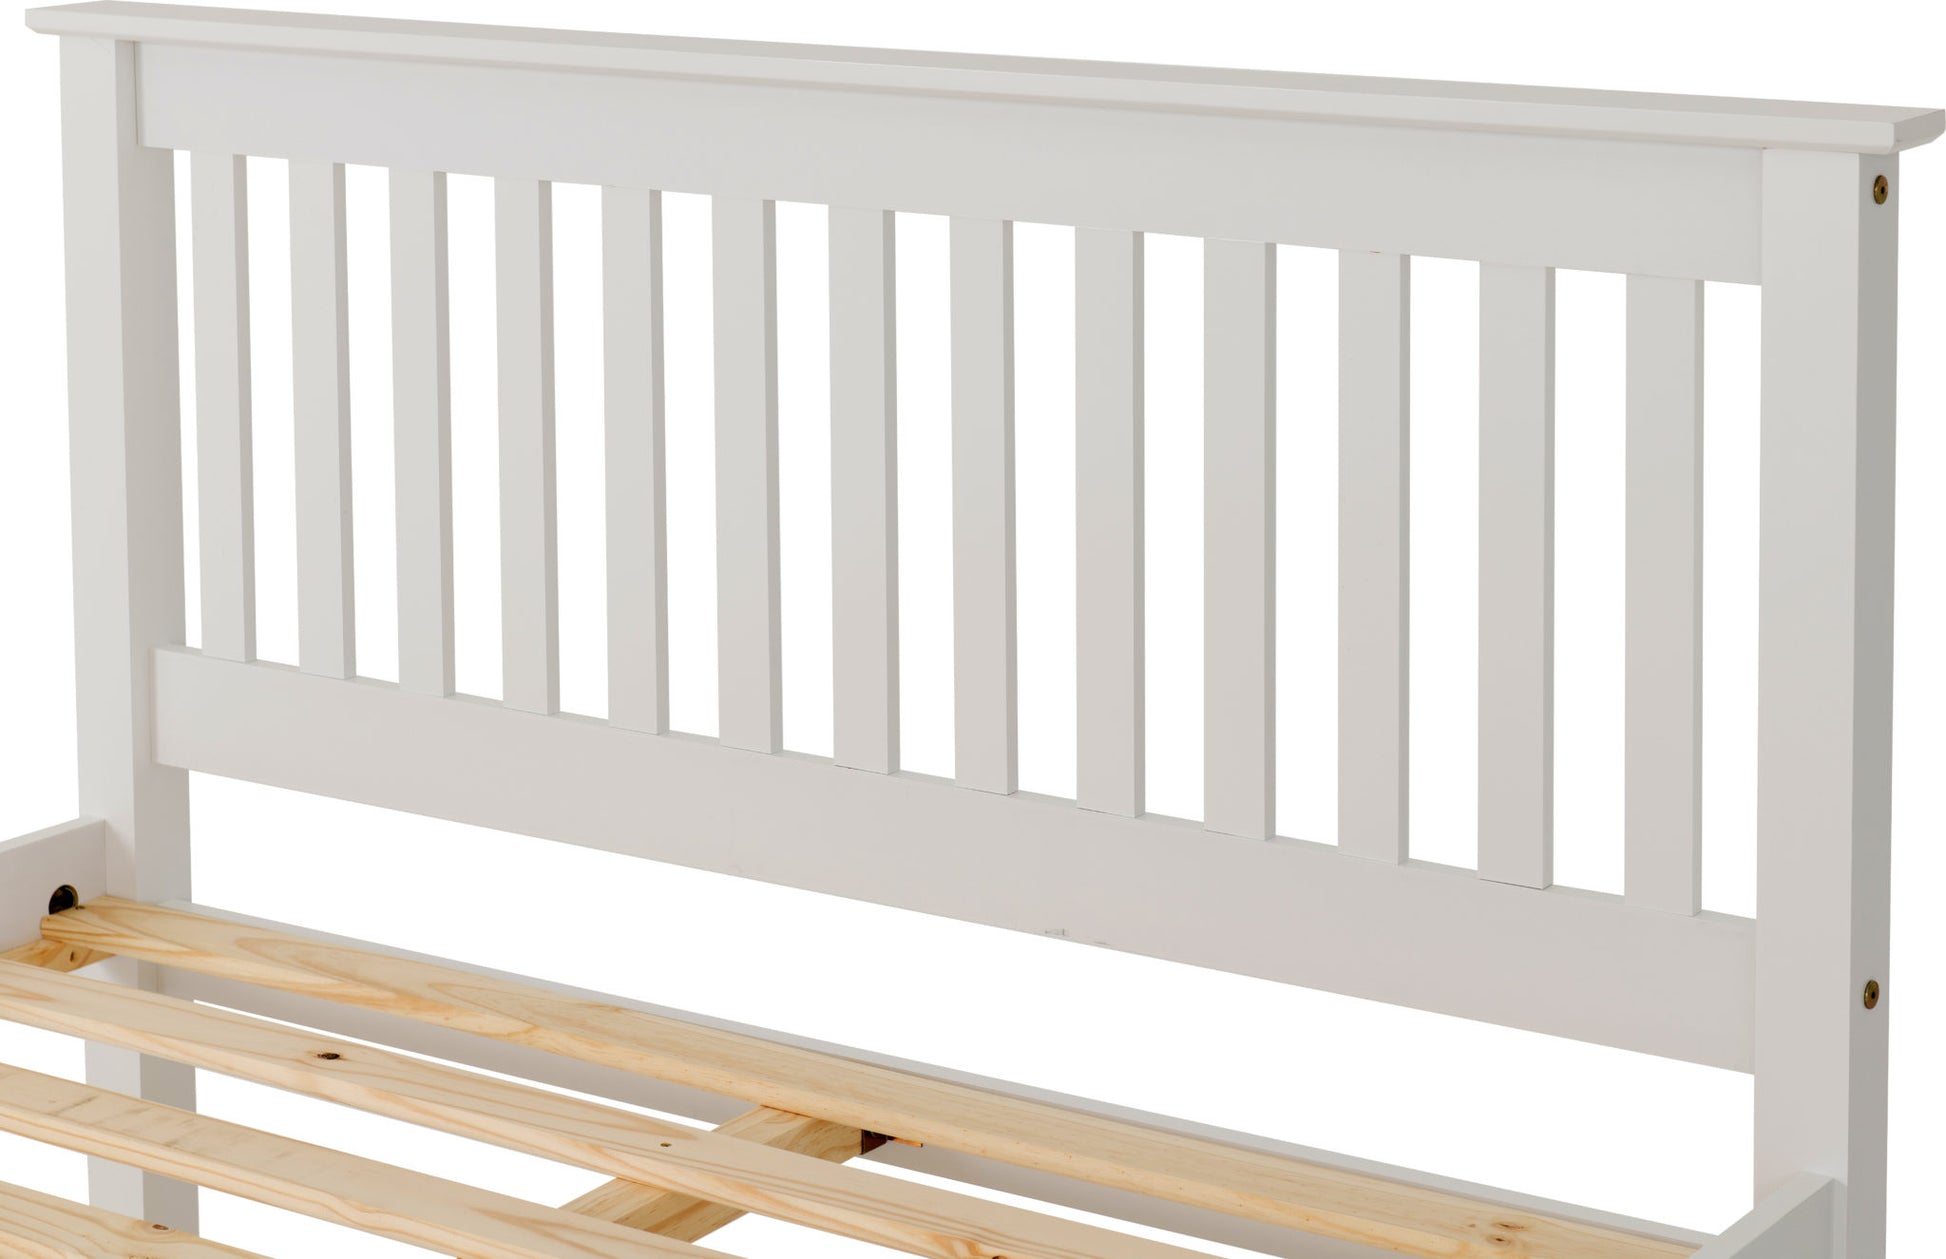 Monaco 4'6" Bed Low Foot End - White